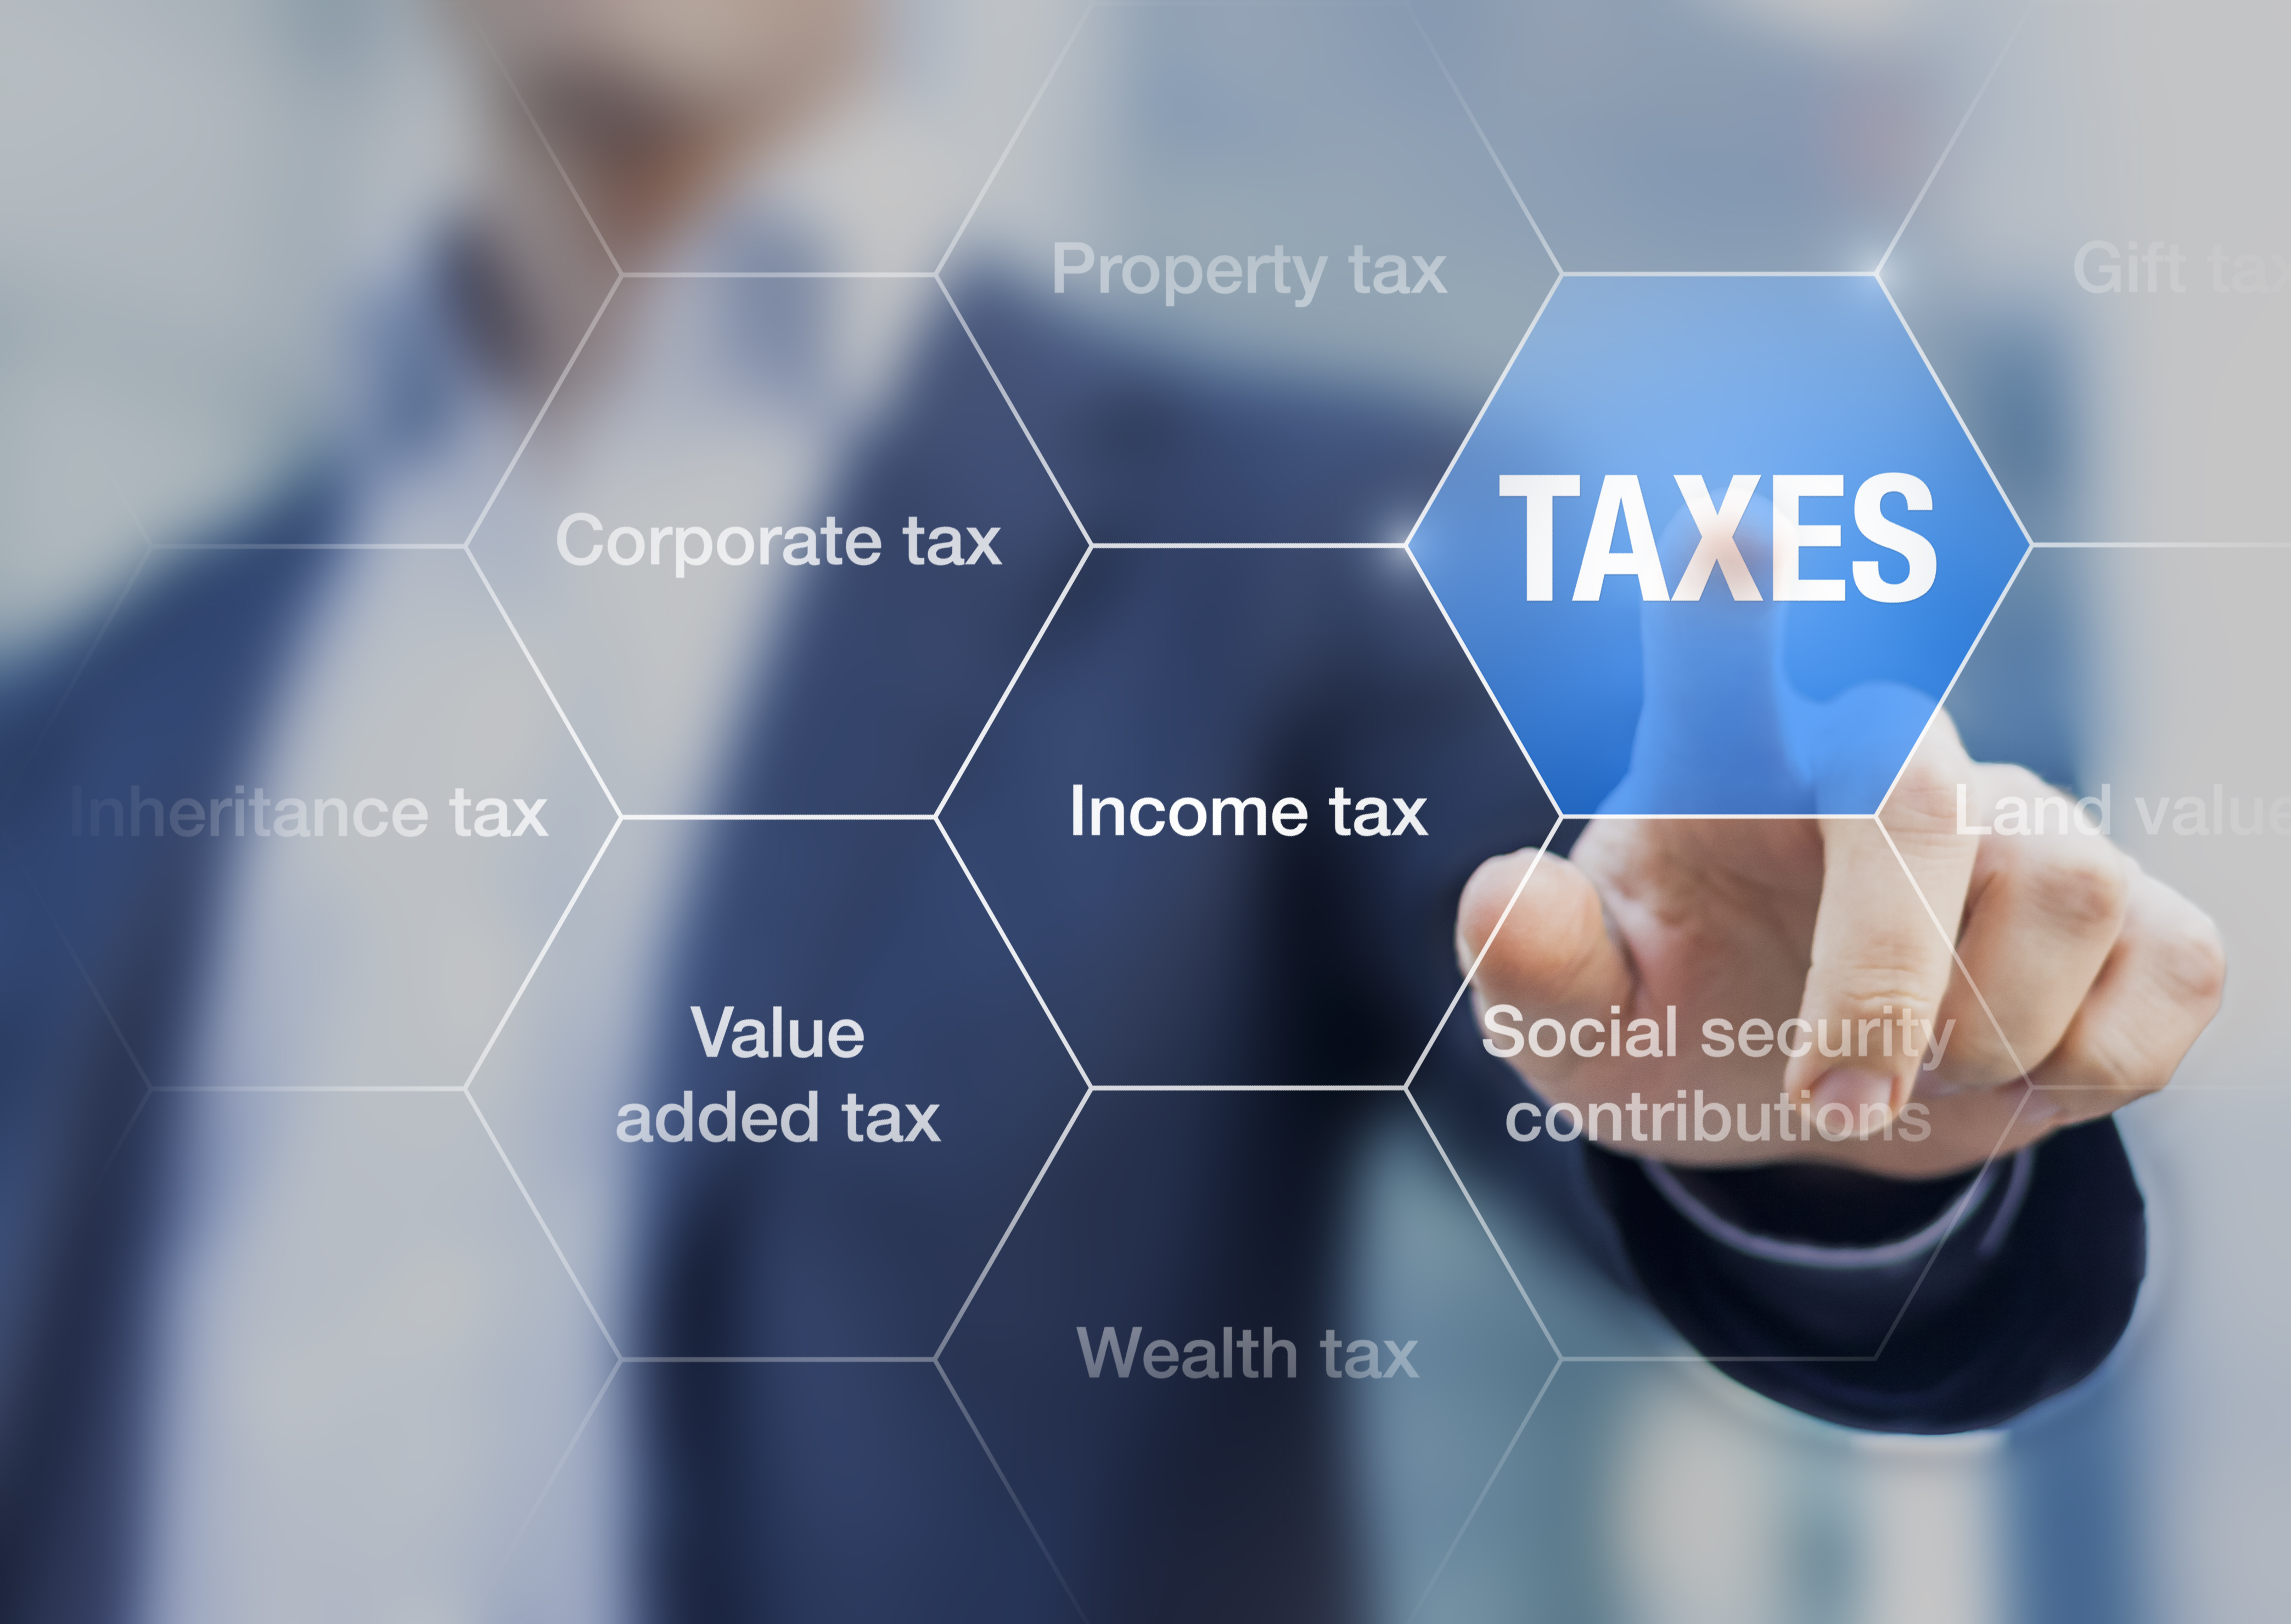 5 Most Important Things You Should Know Before Hiring A Tax Preparation Service